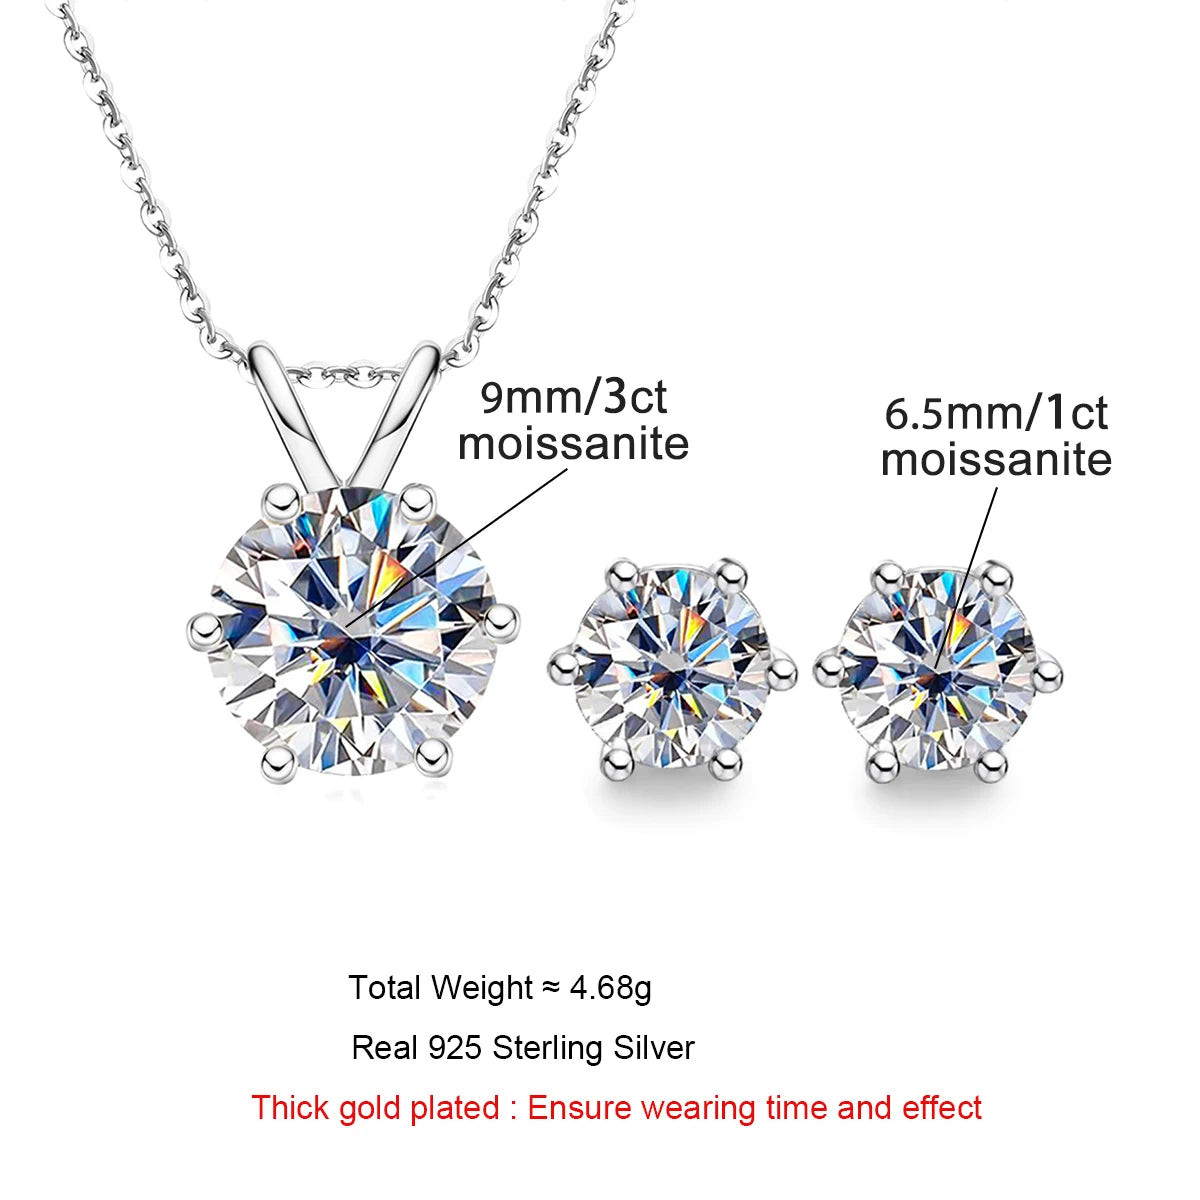 Moissanite Jewelry Sets. Necklace 3.0 Carat. Earrings 2.0 Carat.